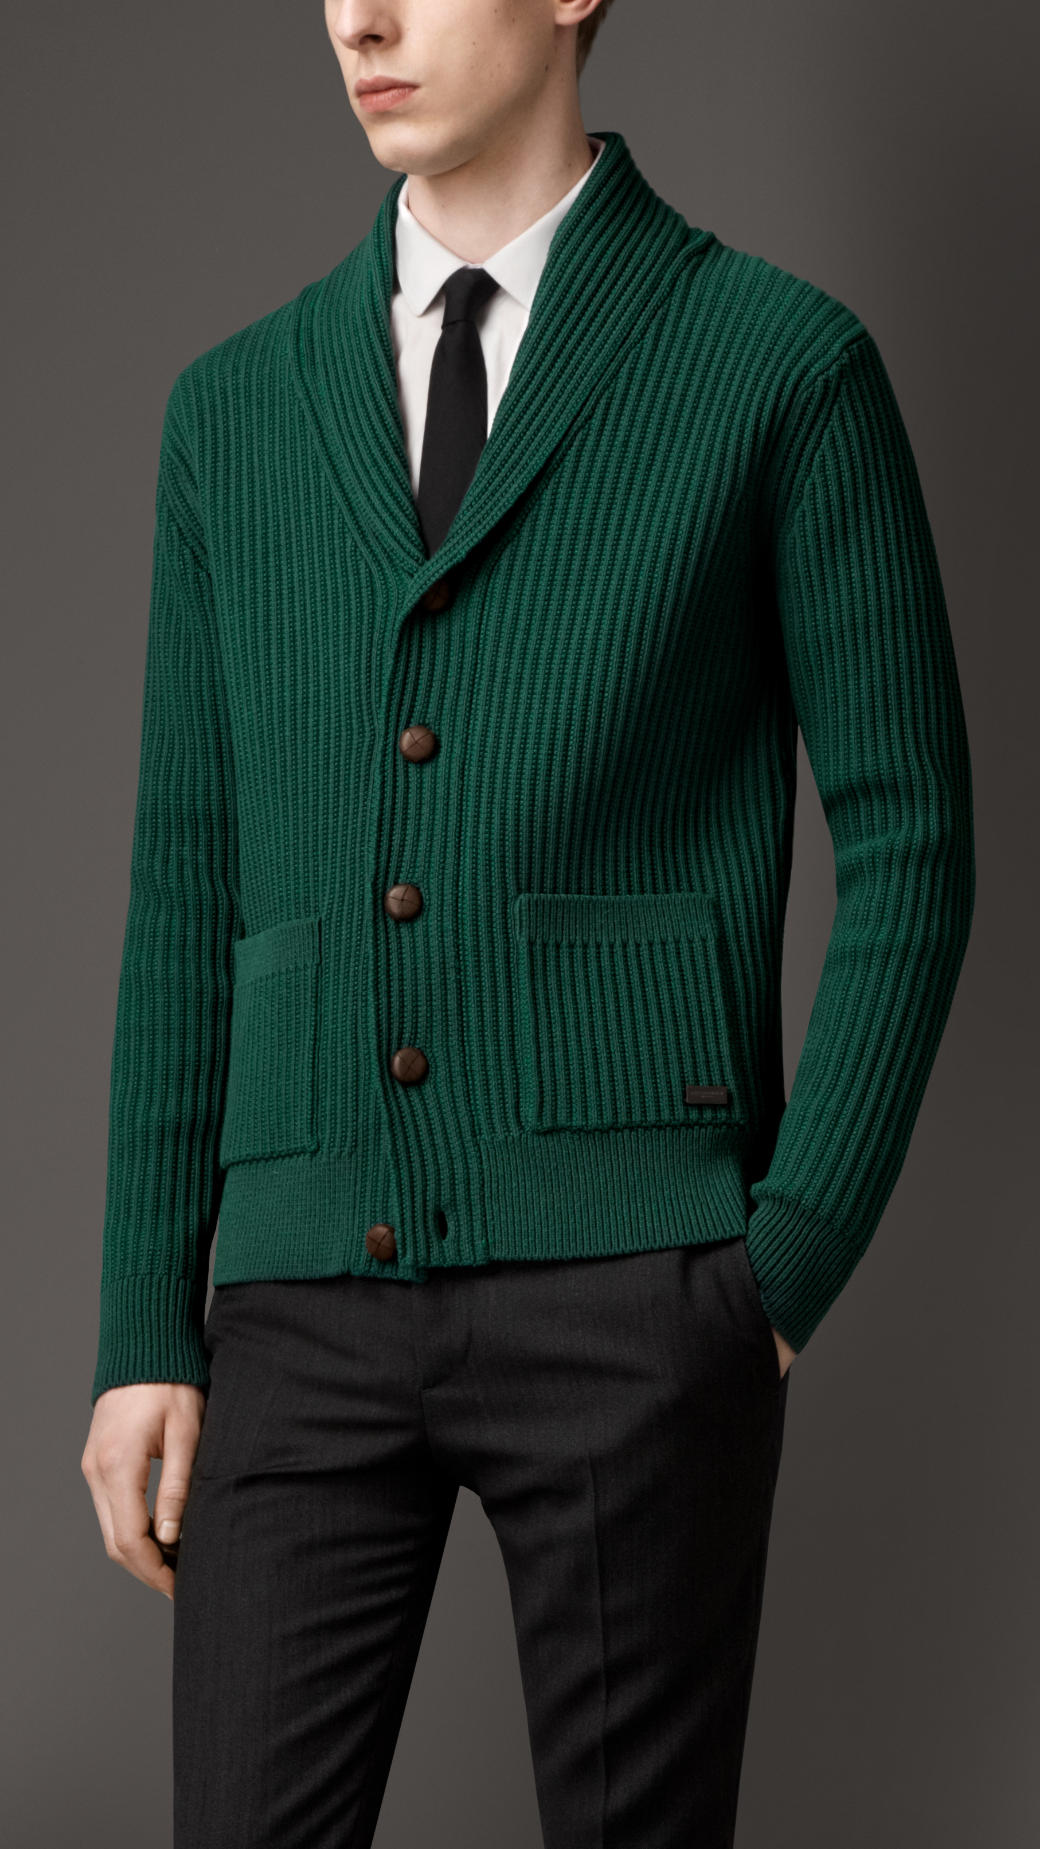 Lyst - Burberry Knitted Cotton Blend Cardigan Jacket in Green for Men